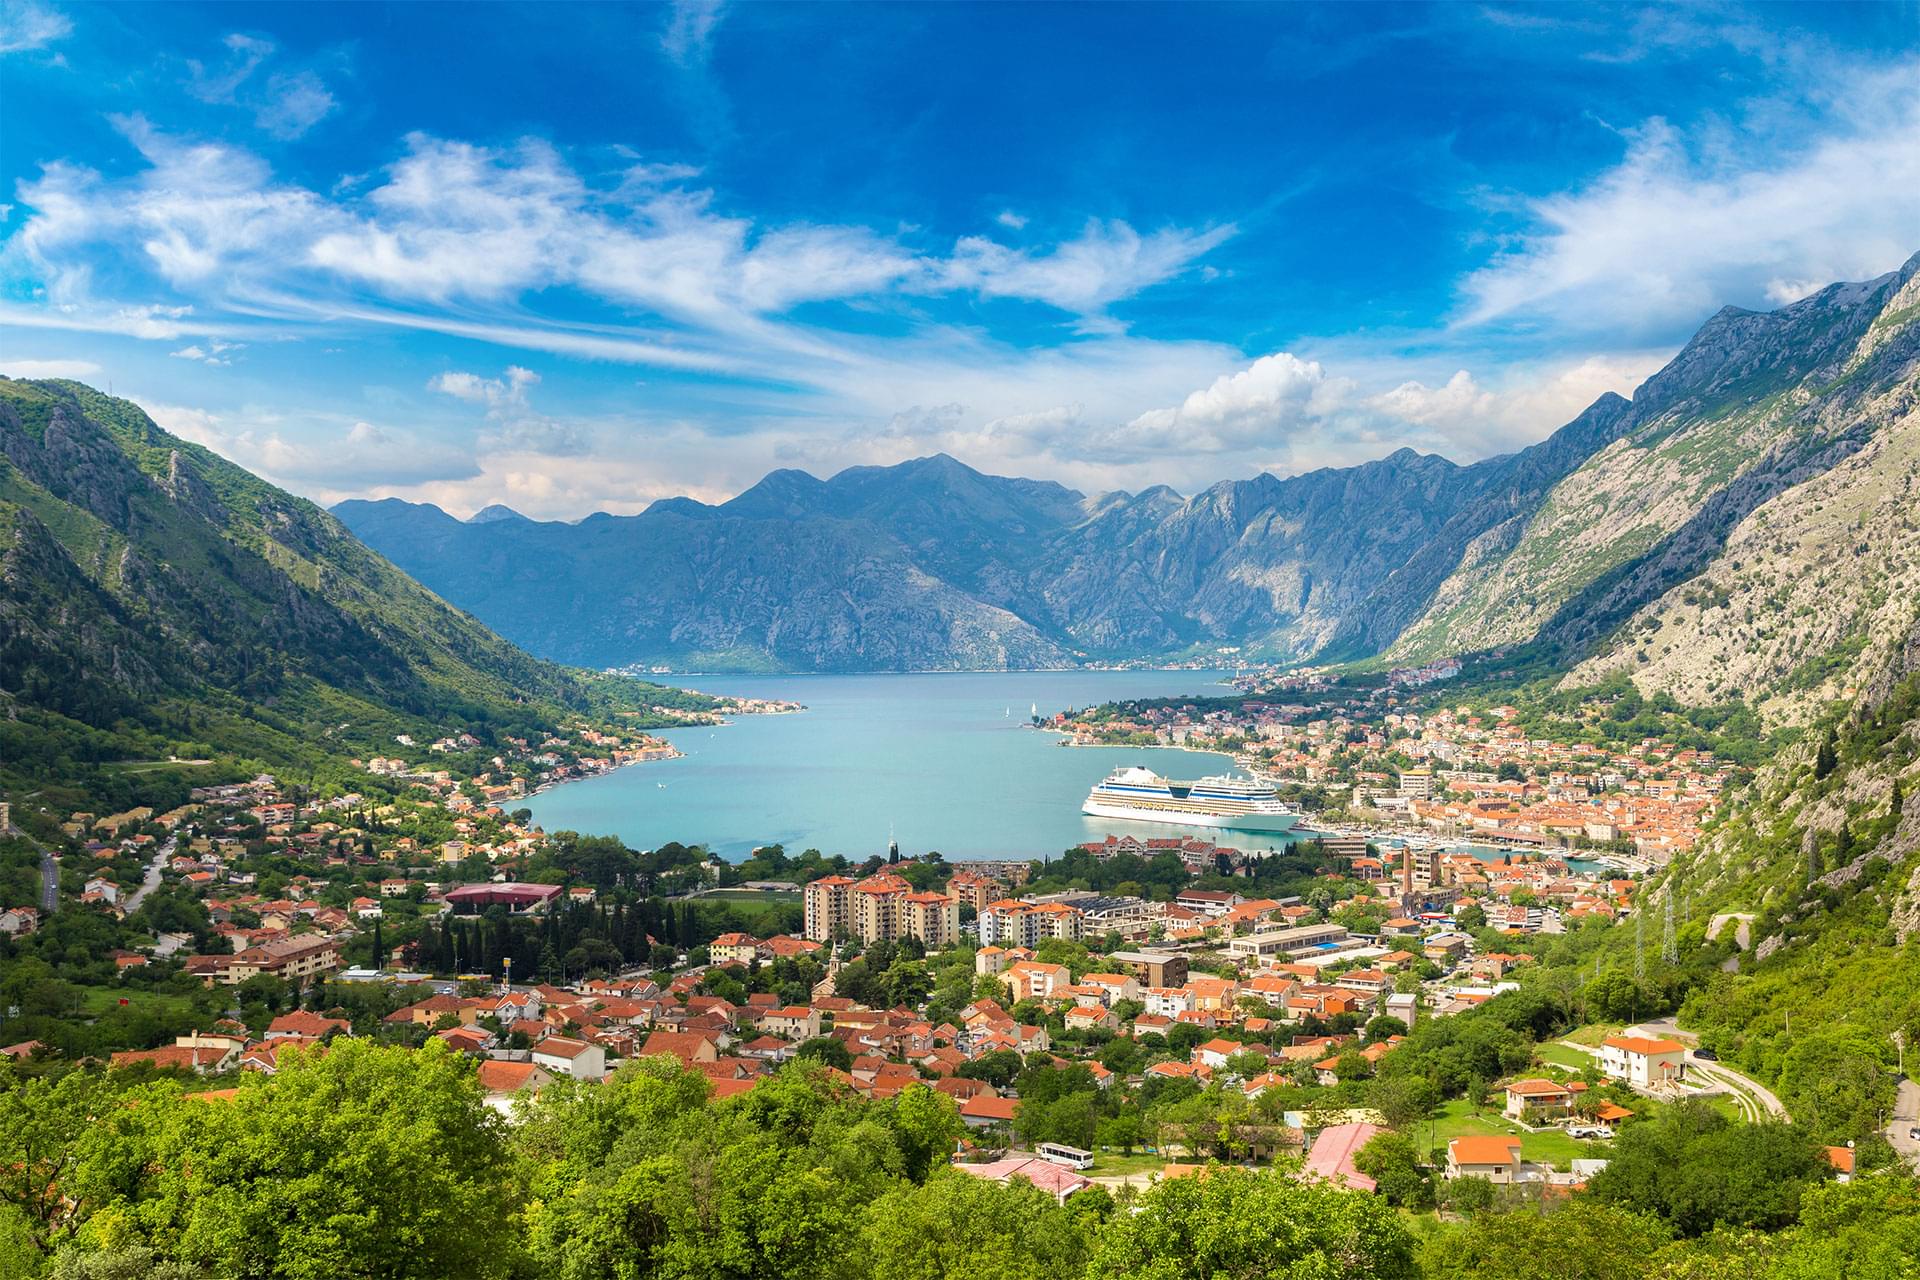 1581196229 954 Tourism in Montenegro learn about its advantages - Tourism in Montenegro, learn about its advantages